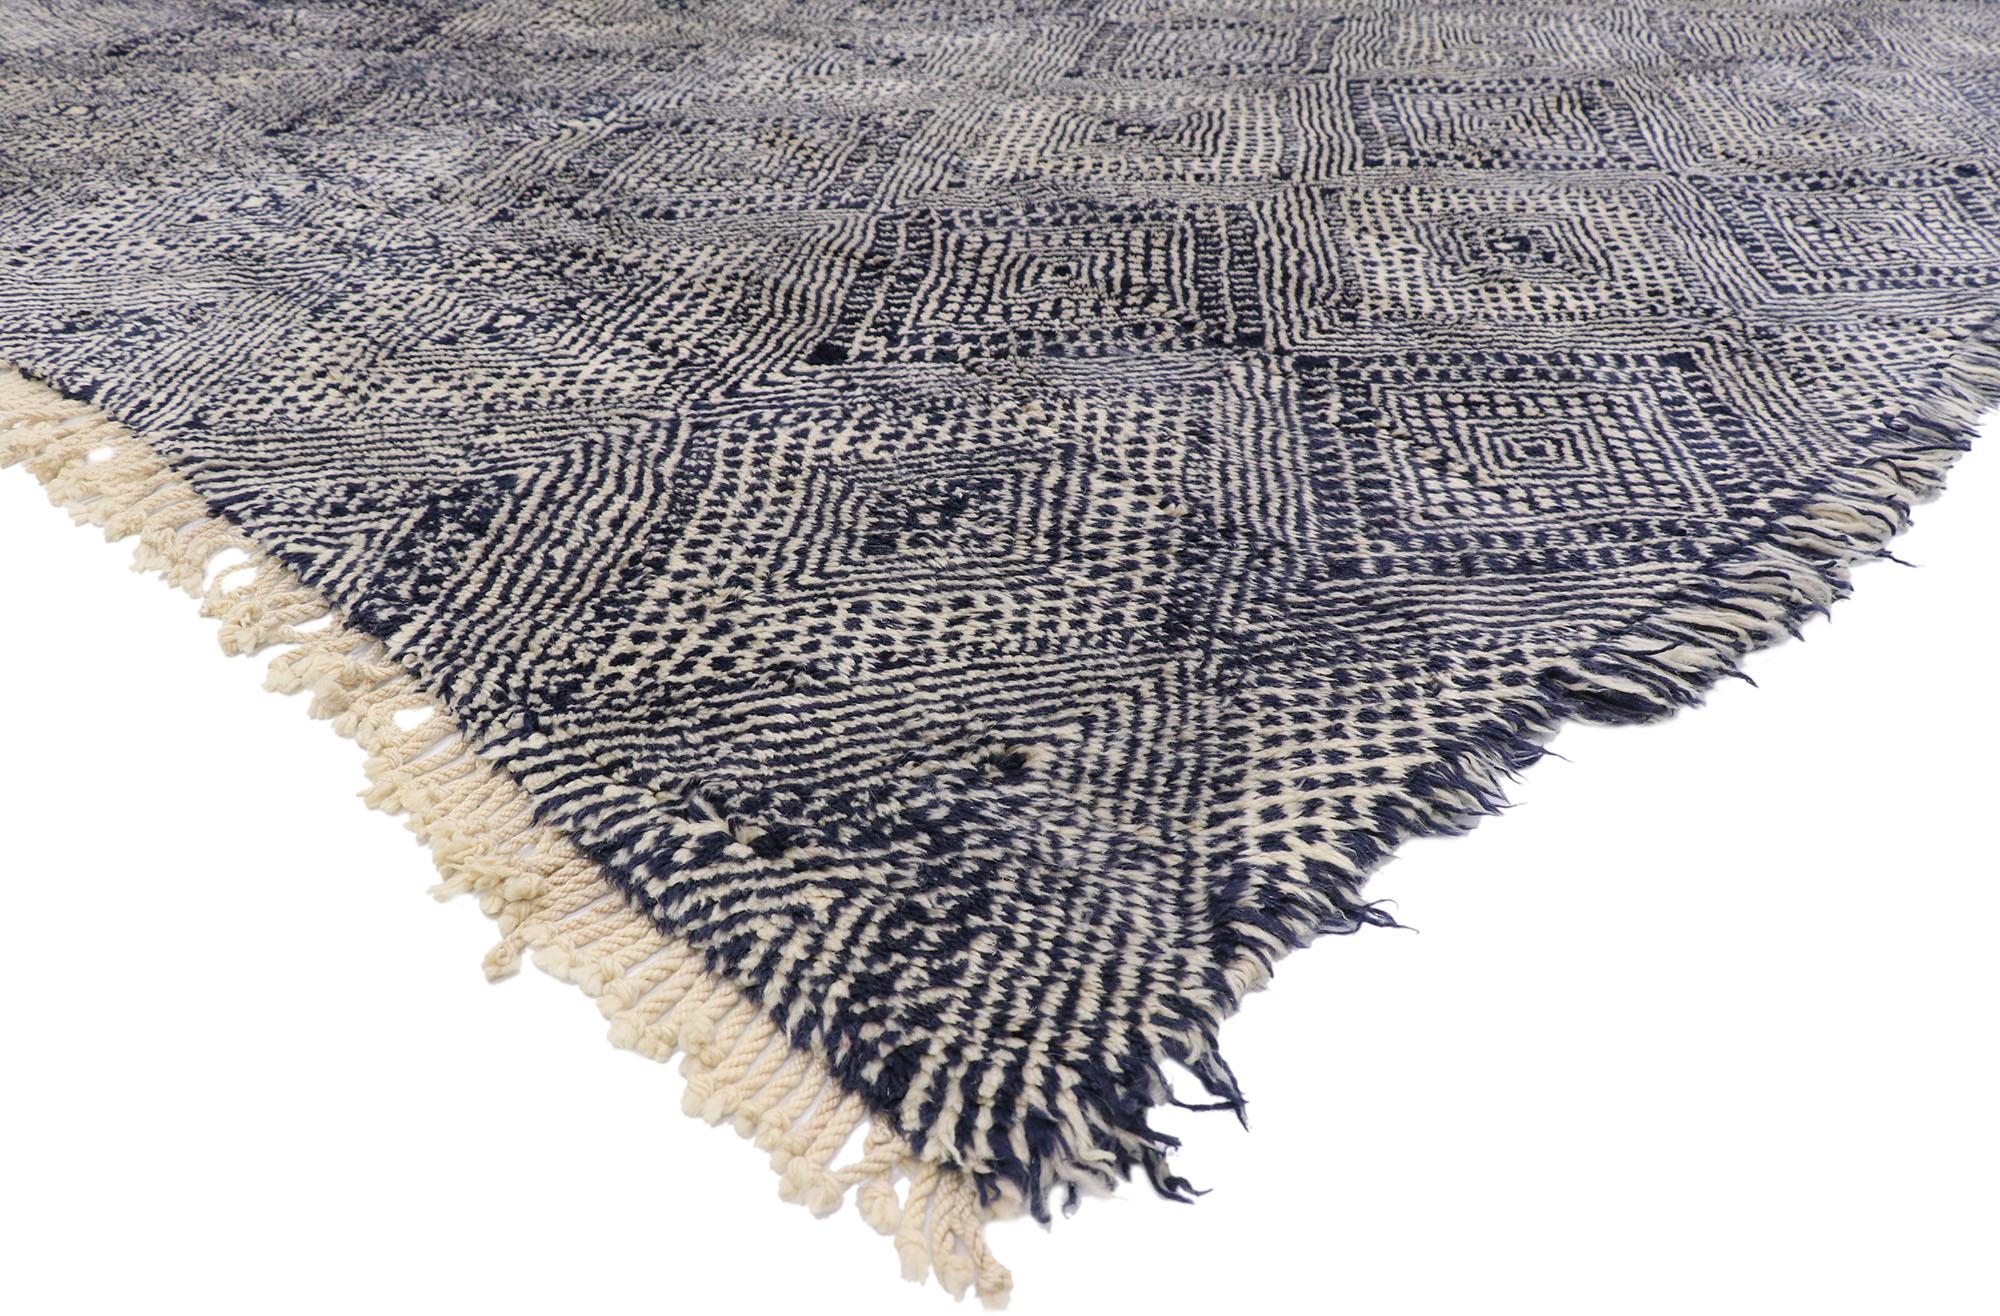 21178 New Contemporary Berber Moroccan rug with Modern Style 10'00 x 14'07. Showcasing a bold expressive design, incredible detail and texture, this hand knotted wool contemporary Berber Moroccan rug is a captivating vision of woven beauty. The